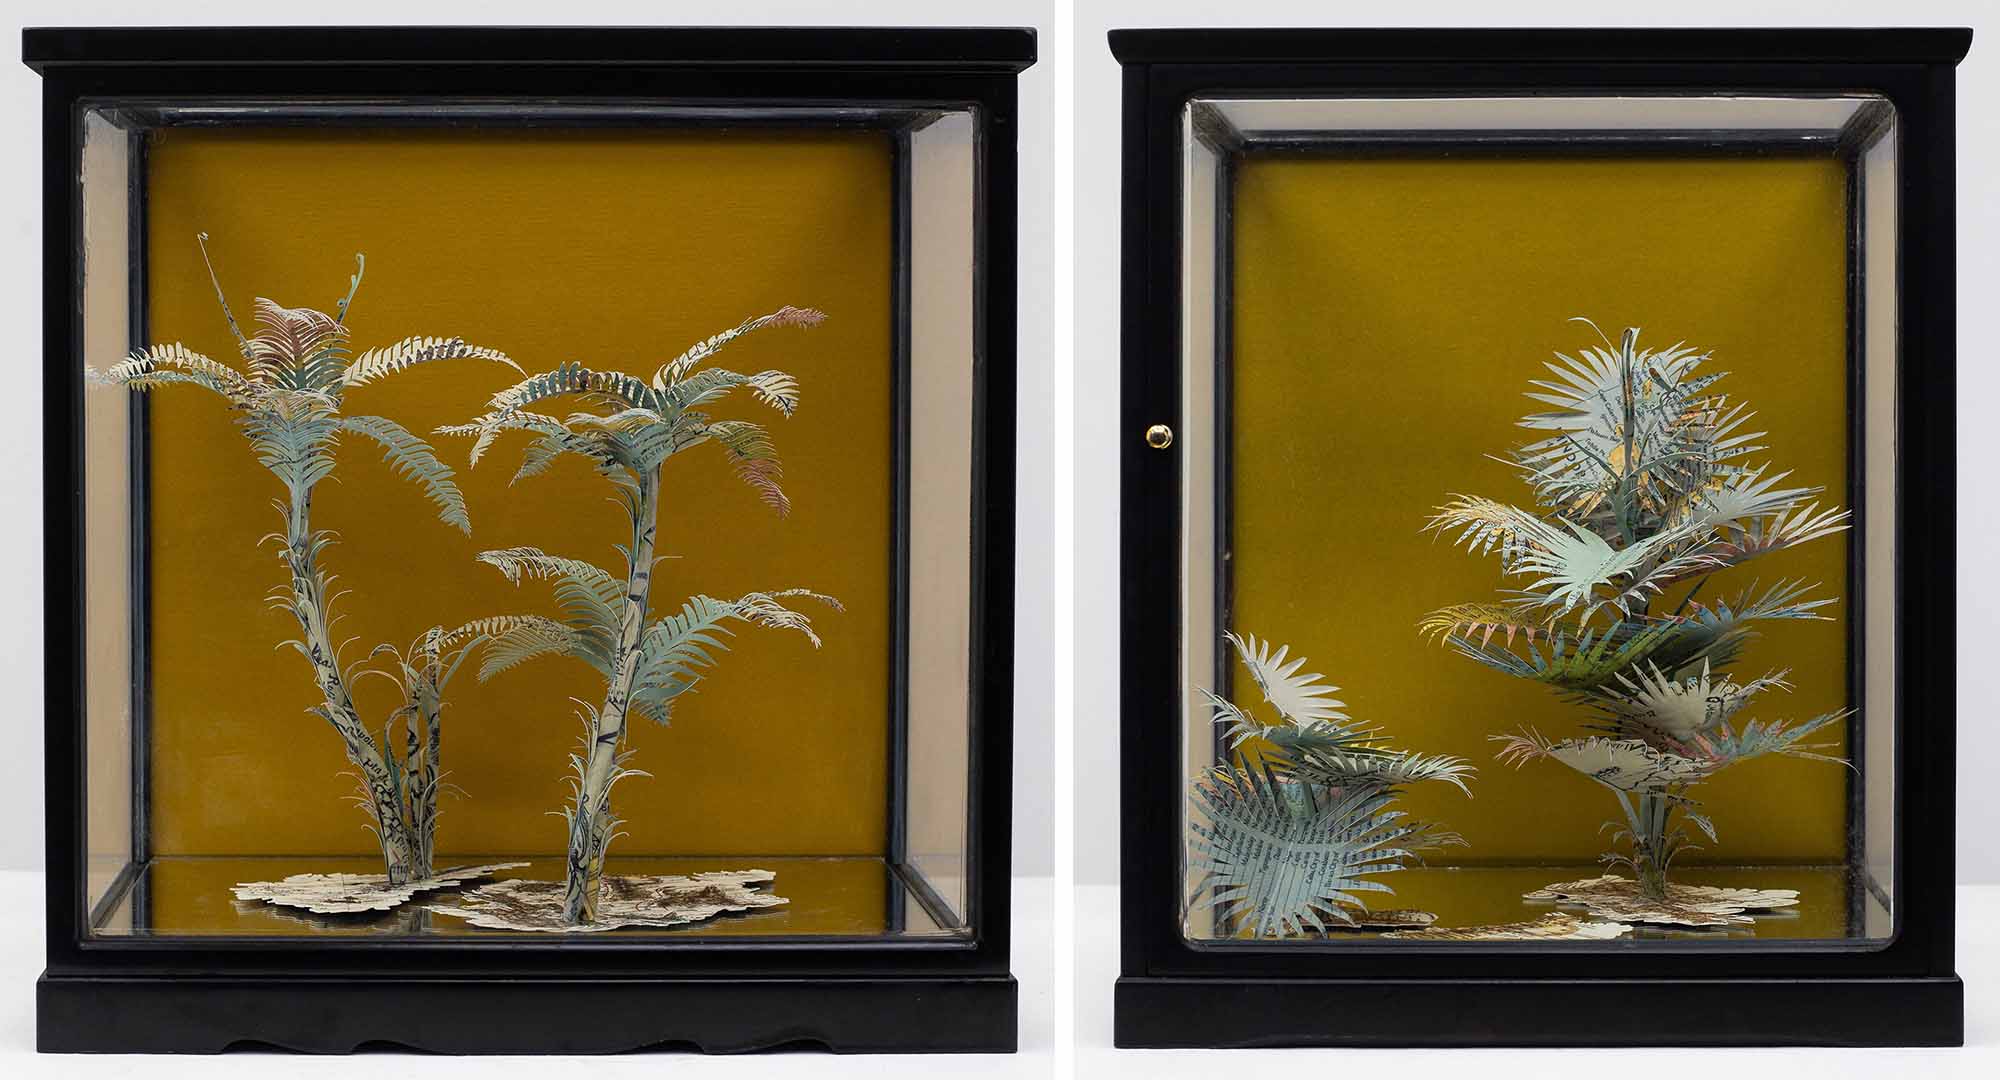 Leaves and plants made from paper, encased within a glass box.